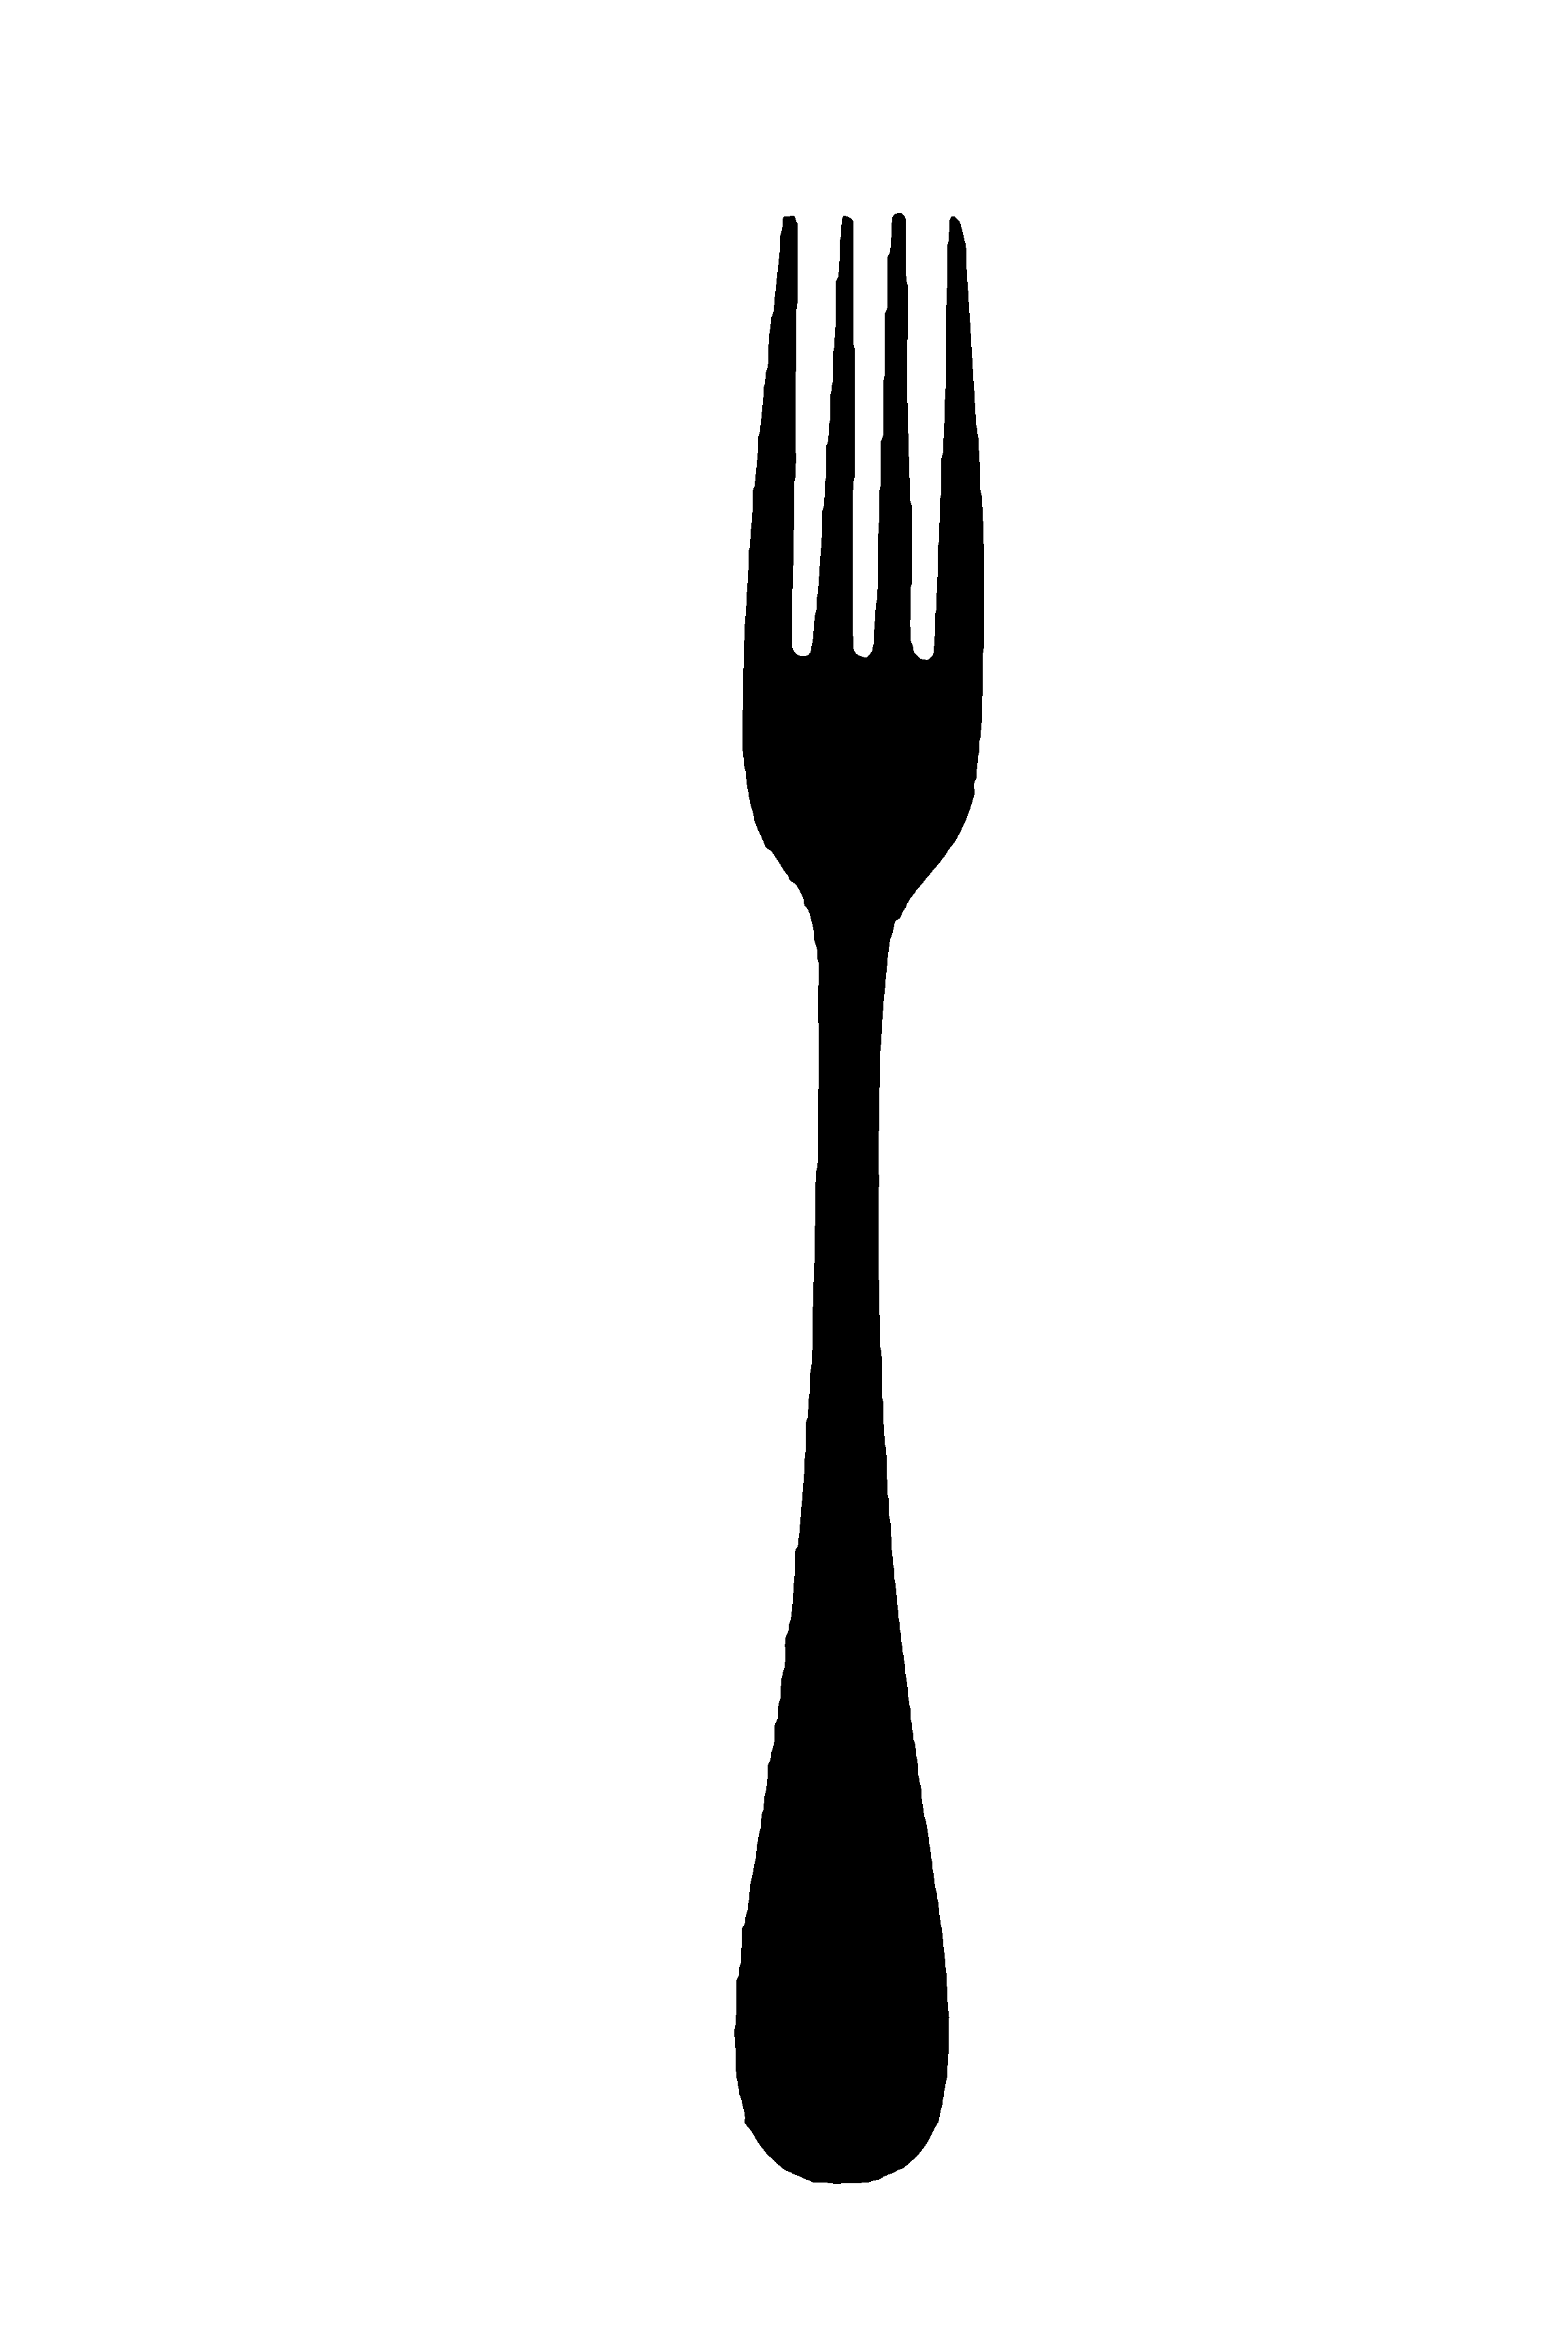 These are two vintage fork di